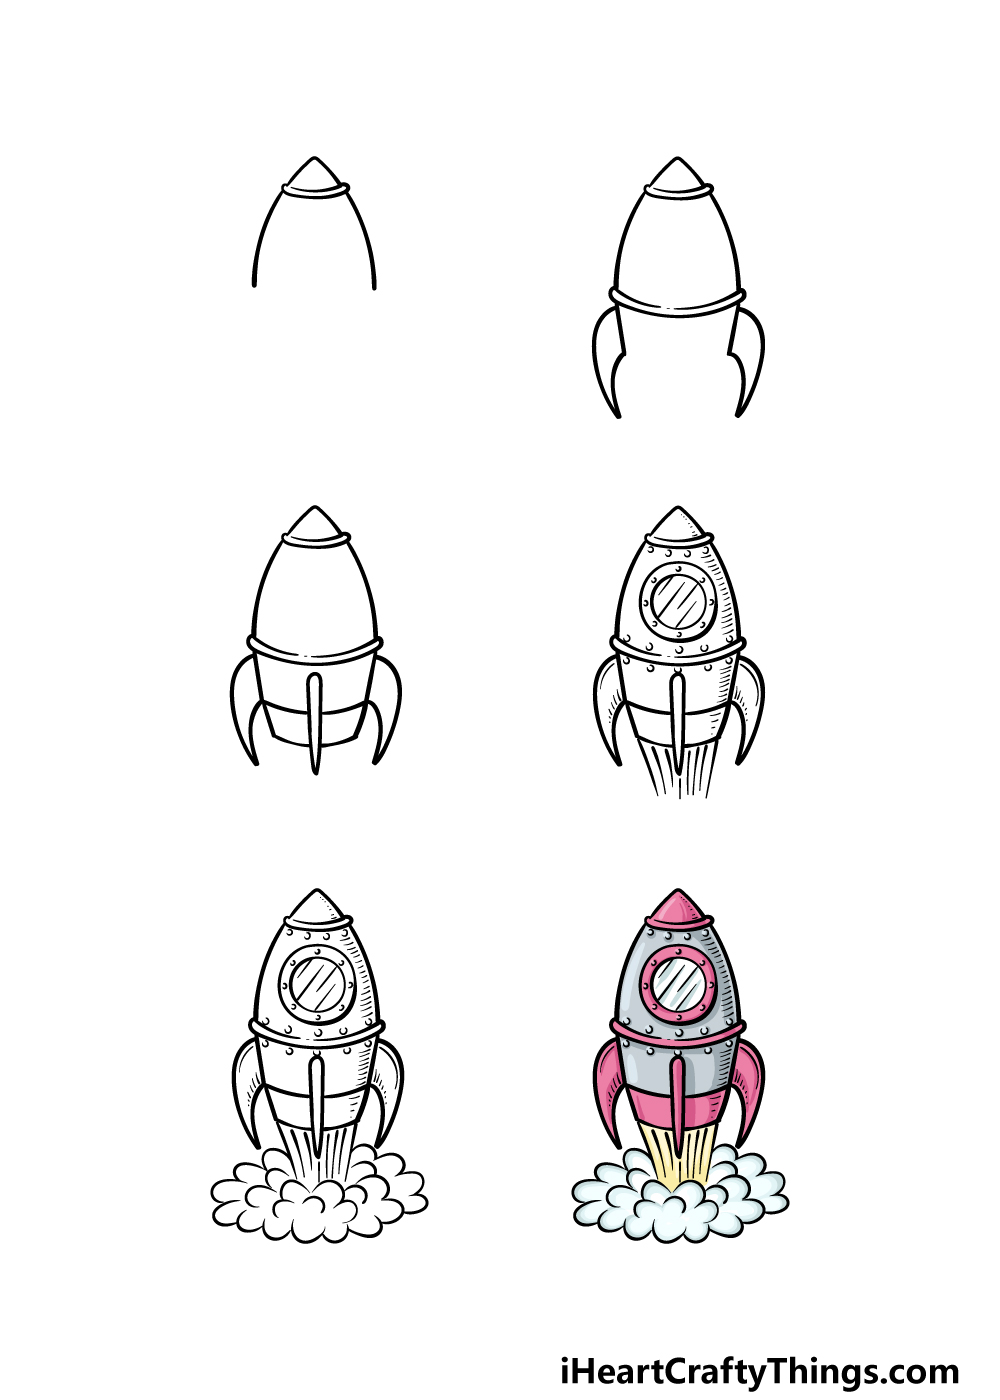 how to draw a Rocket Ship in 6 steps